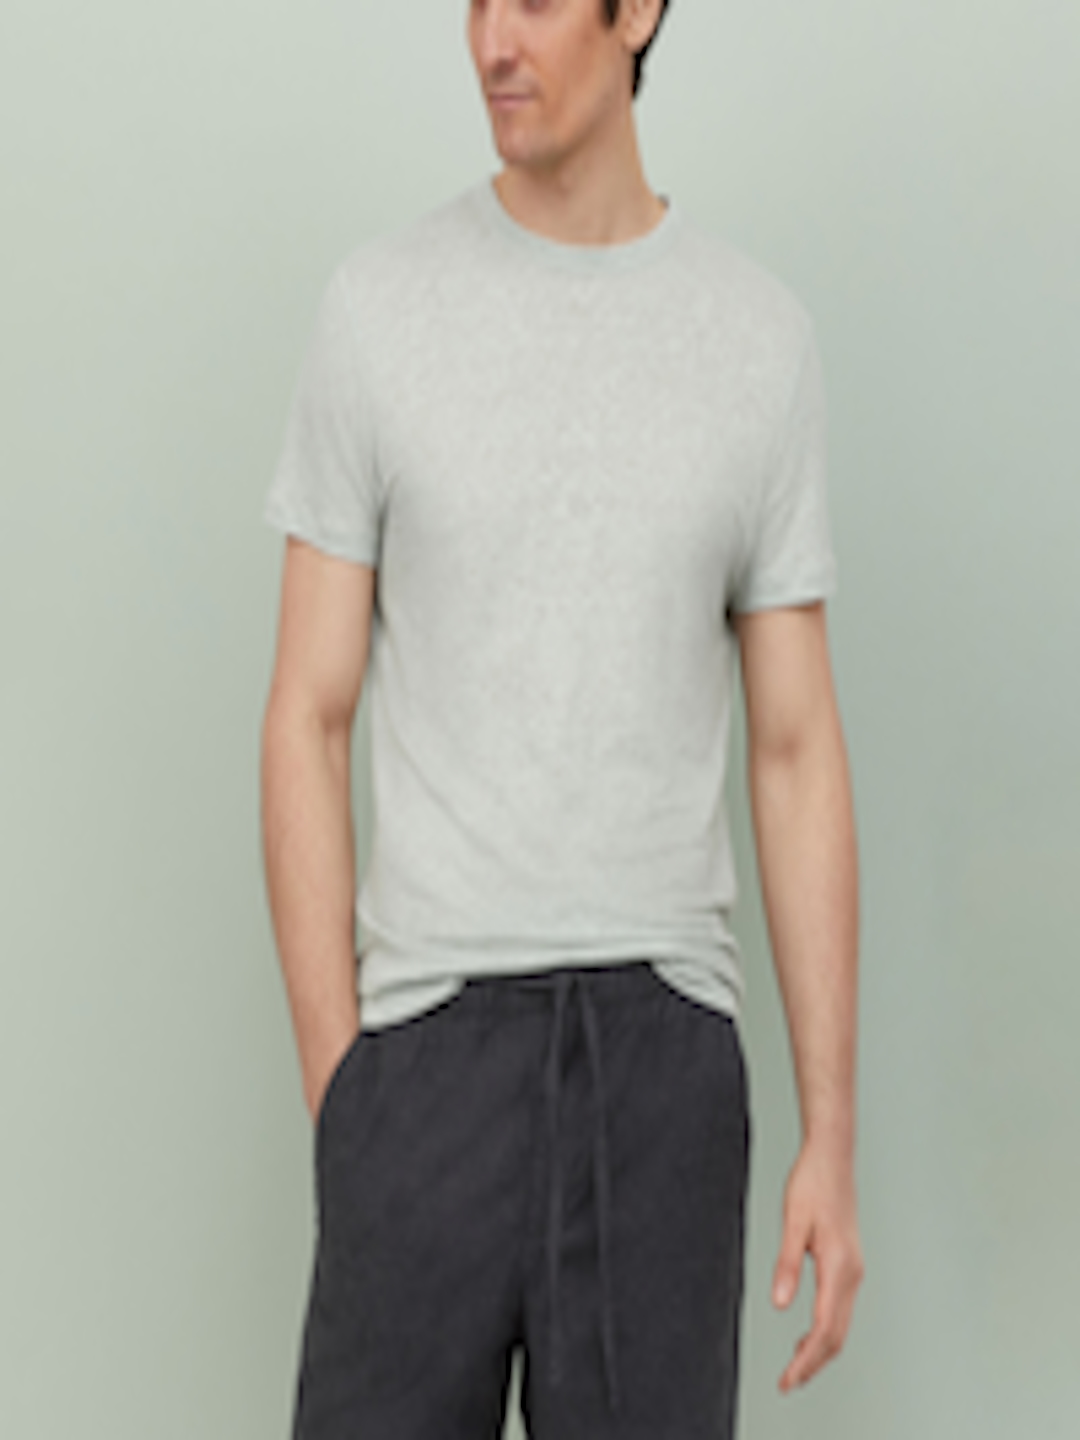 Buy H&M Men Charcoal Black Shorts Relaxed Fit - Shorts for Men 12042040 ...